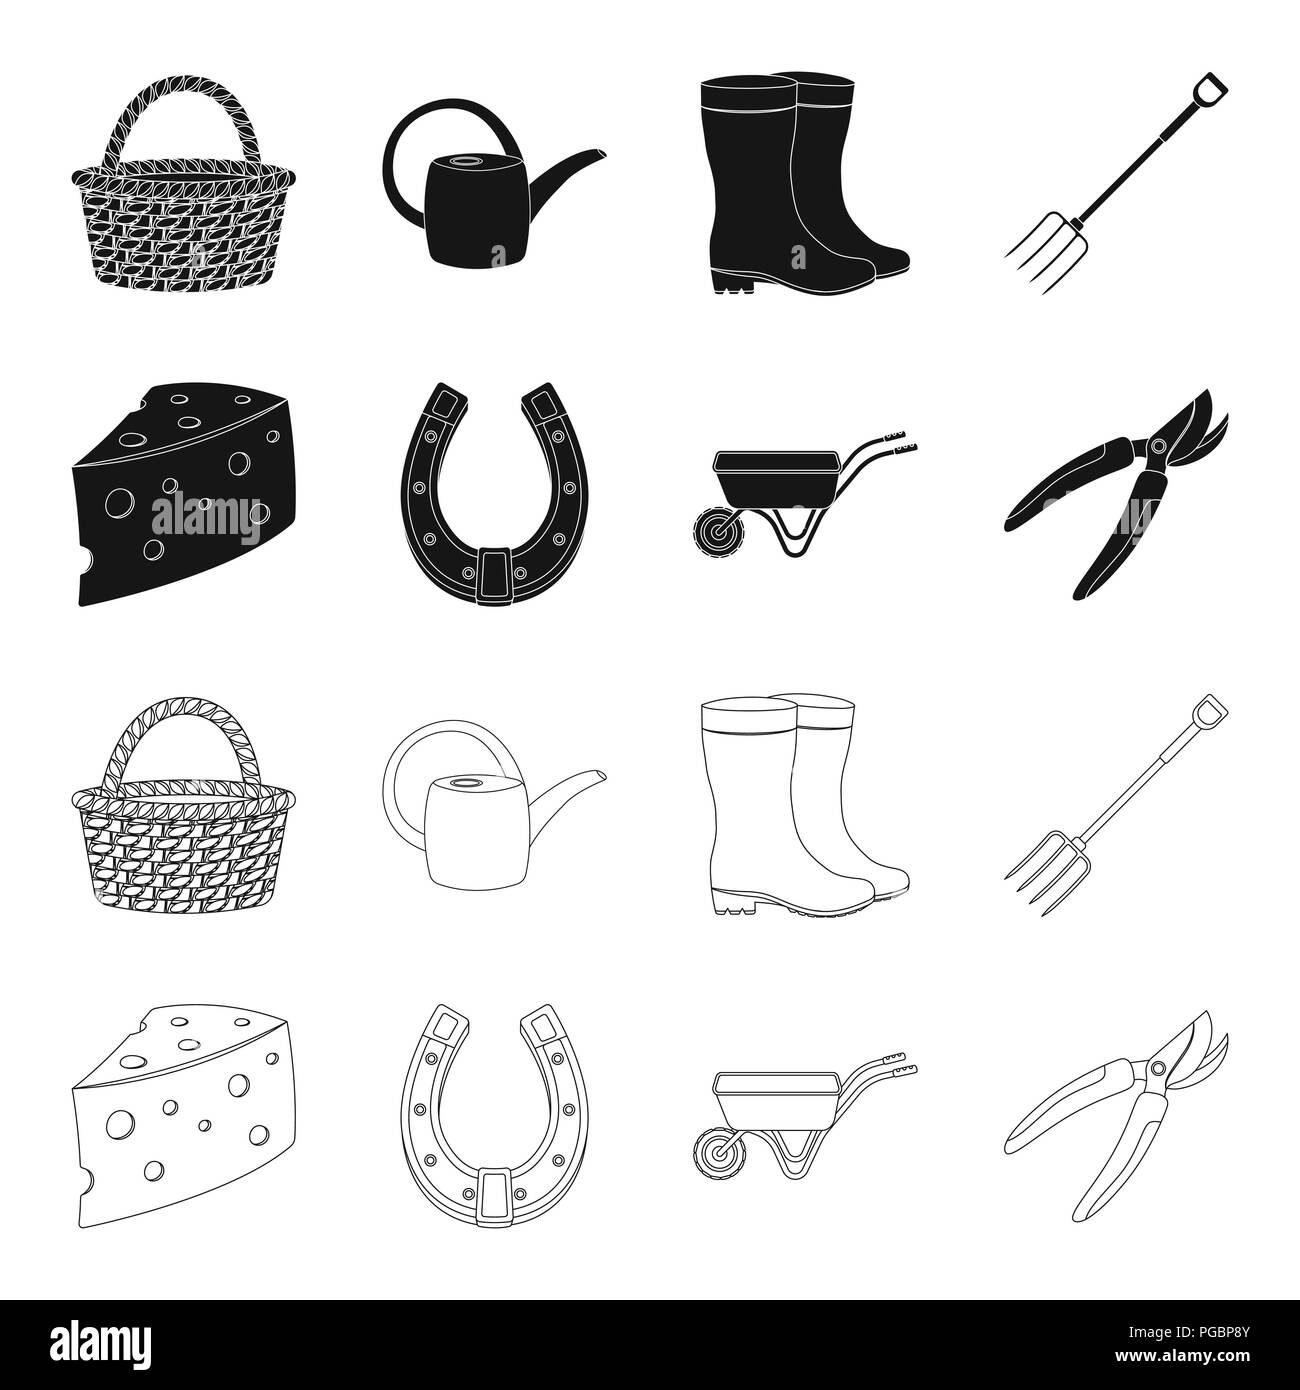 Cheese with holes, a trolley for agricultural work, a horseshoe made of metal, a pruner for cutting trees, shrubs. Farm and gardening set collection i Stock Vector